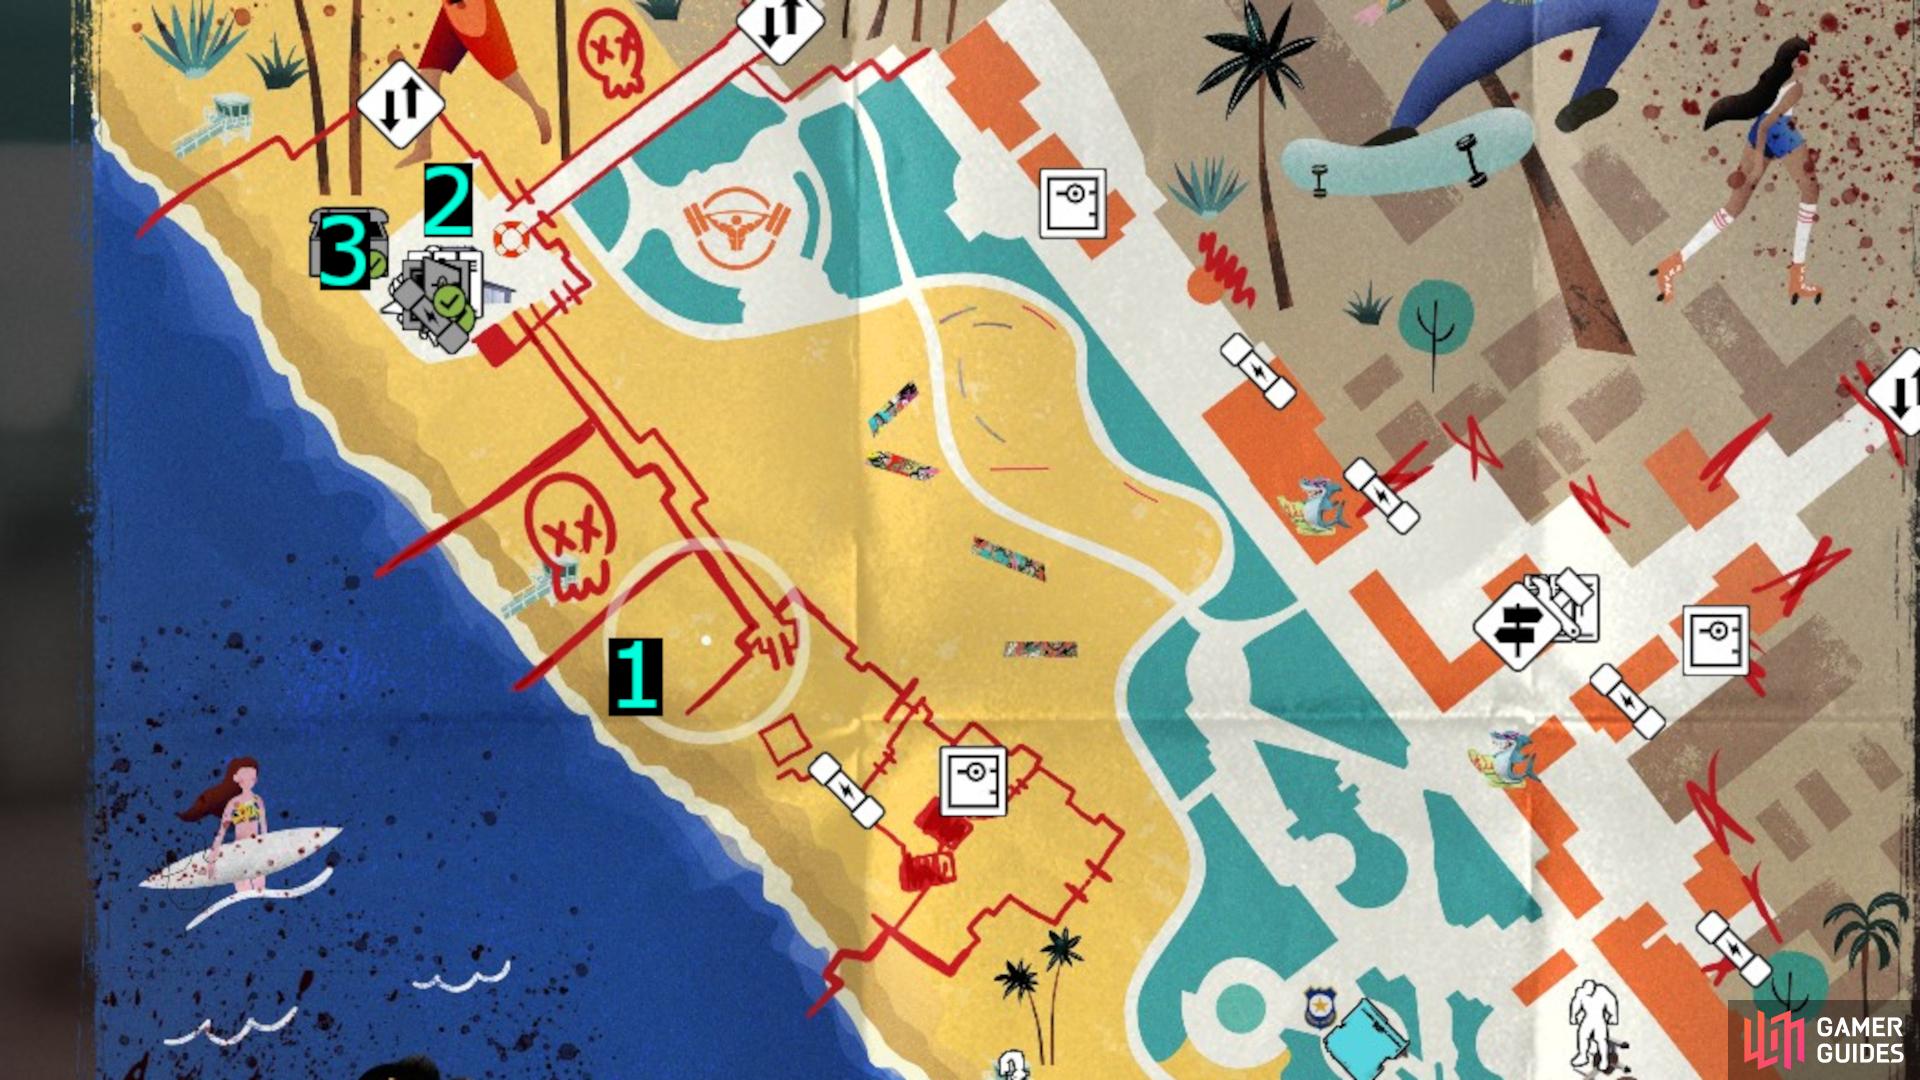 Here’s a map roughly outlining where to go for each step needed to complete the Dead Island 2 Redacated Lost and Found quest. The third point is where you can complete redacted and get Delgado’s Supply Crate Keys.